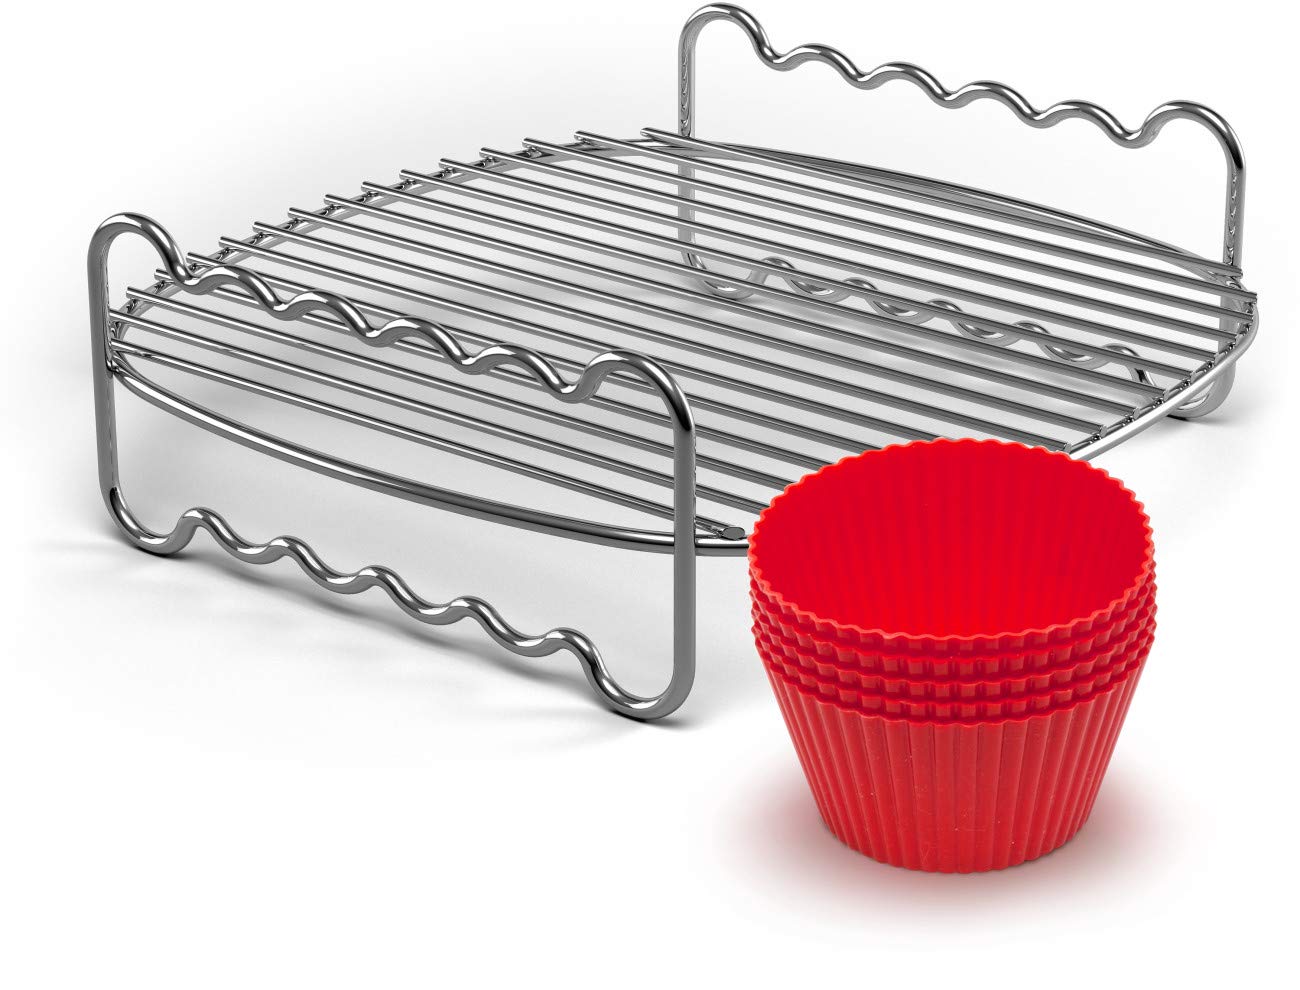 Philips Kitchen Appliances Party Master Accessory Kit with Double Layer Rack and Silicone Muffin Cups-for Philips Compact Airfryer models HD9904/01, Silver/Red